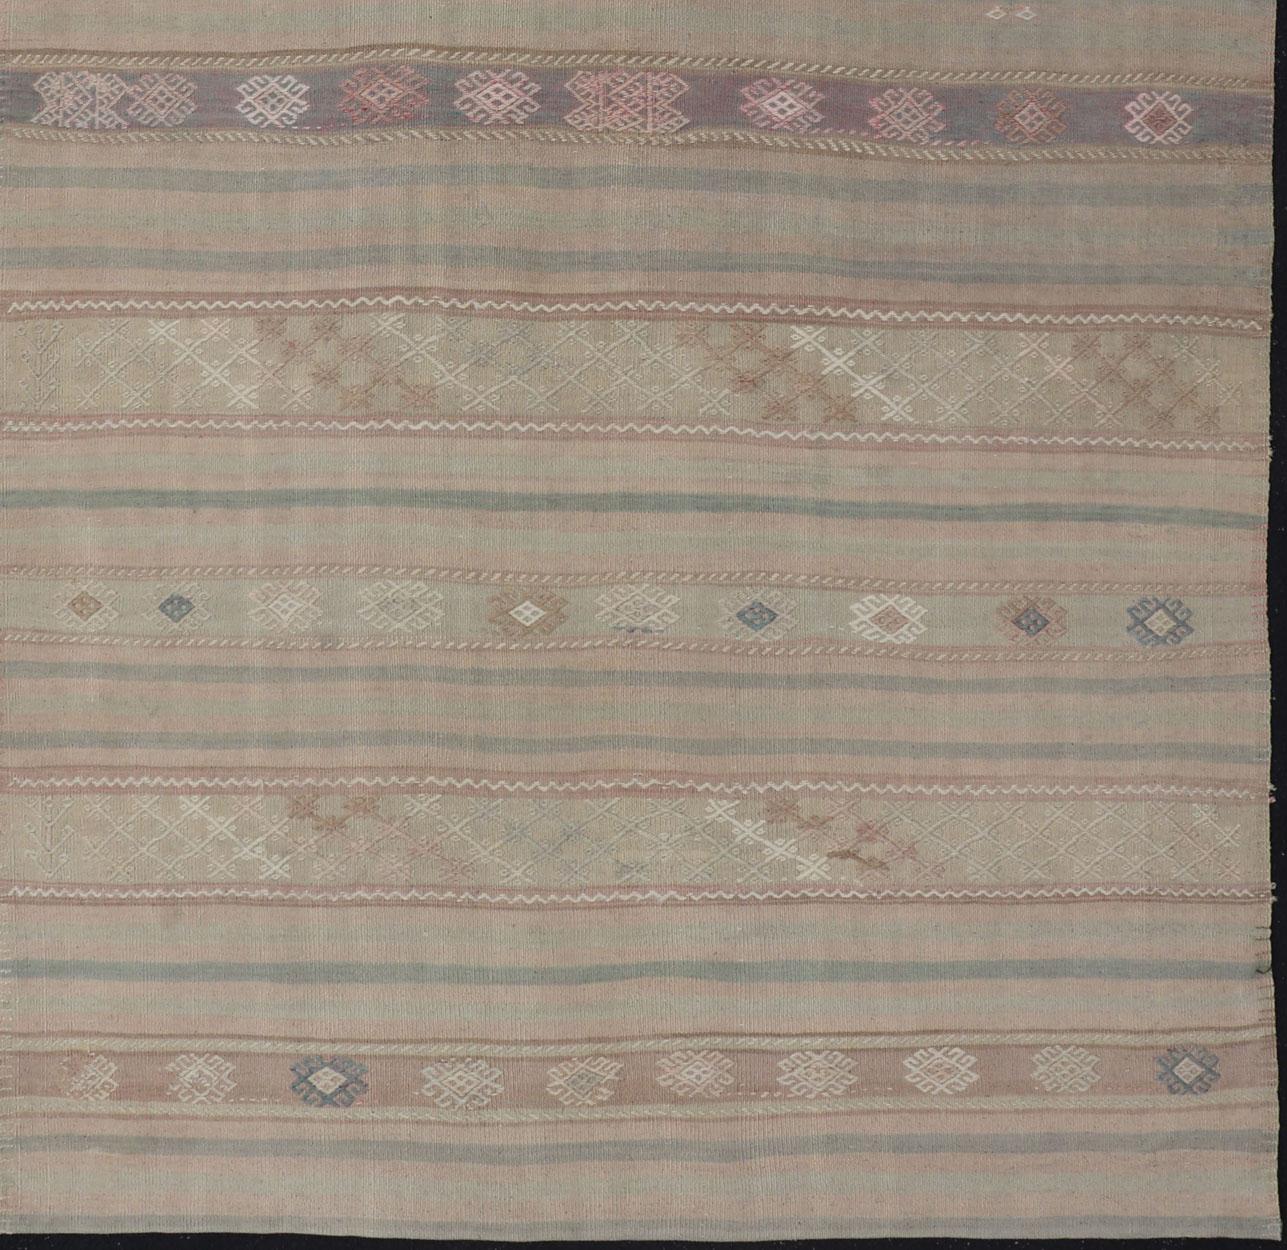 Wool Flat-Weave Turkish Kilim with Embroideries in Earthy Tones and Hints of Pink For Sale